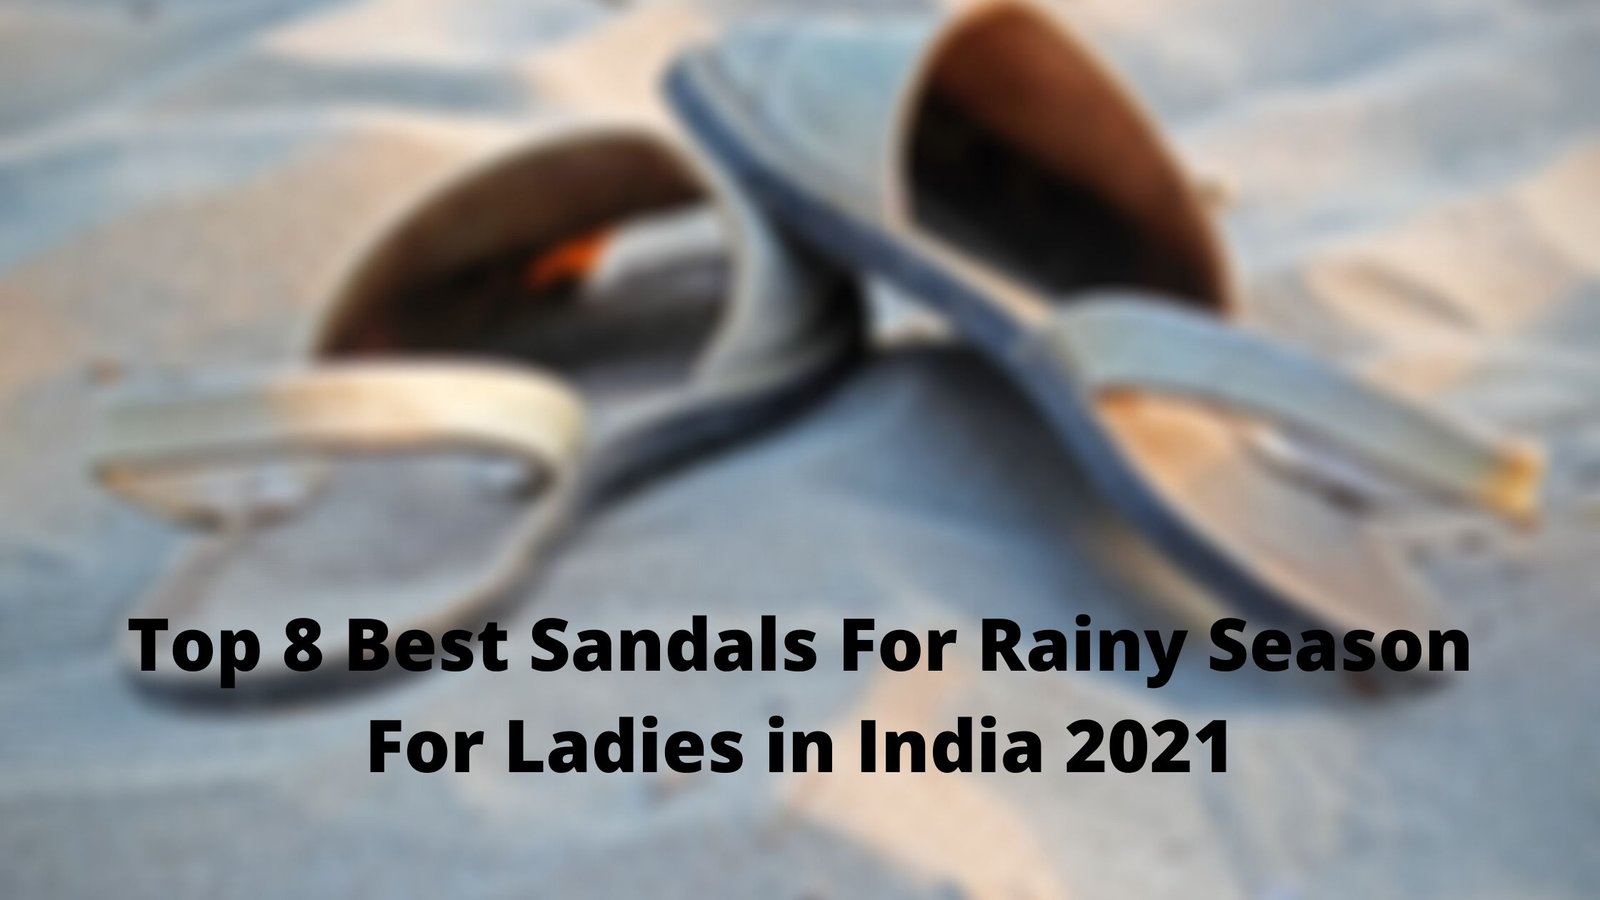 Top 8 Best Sandals For Rainy Season For Ladies in India 2021